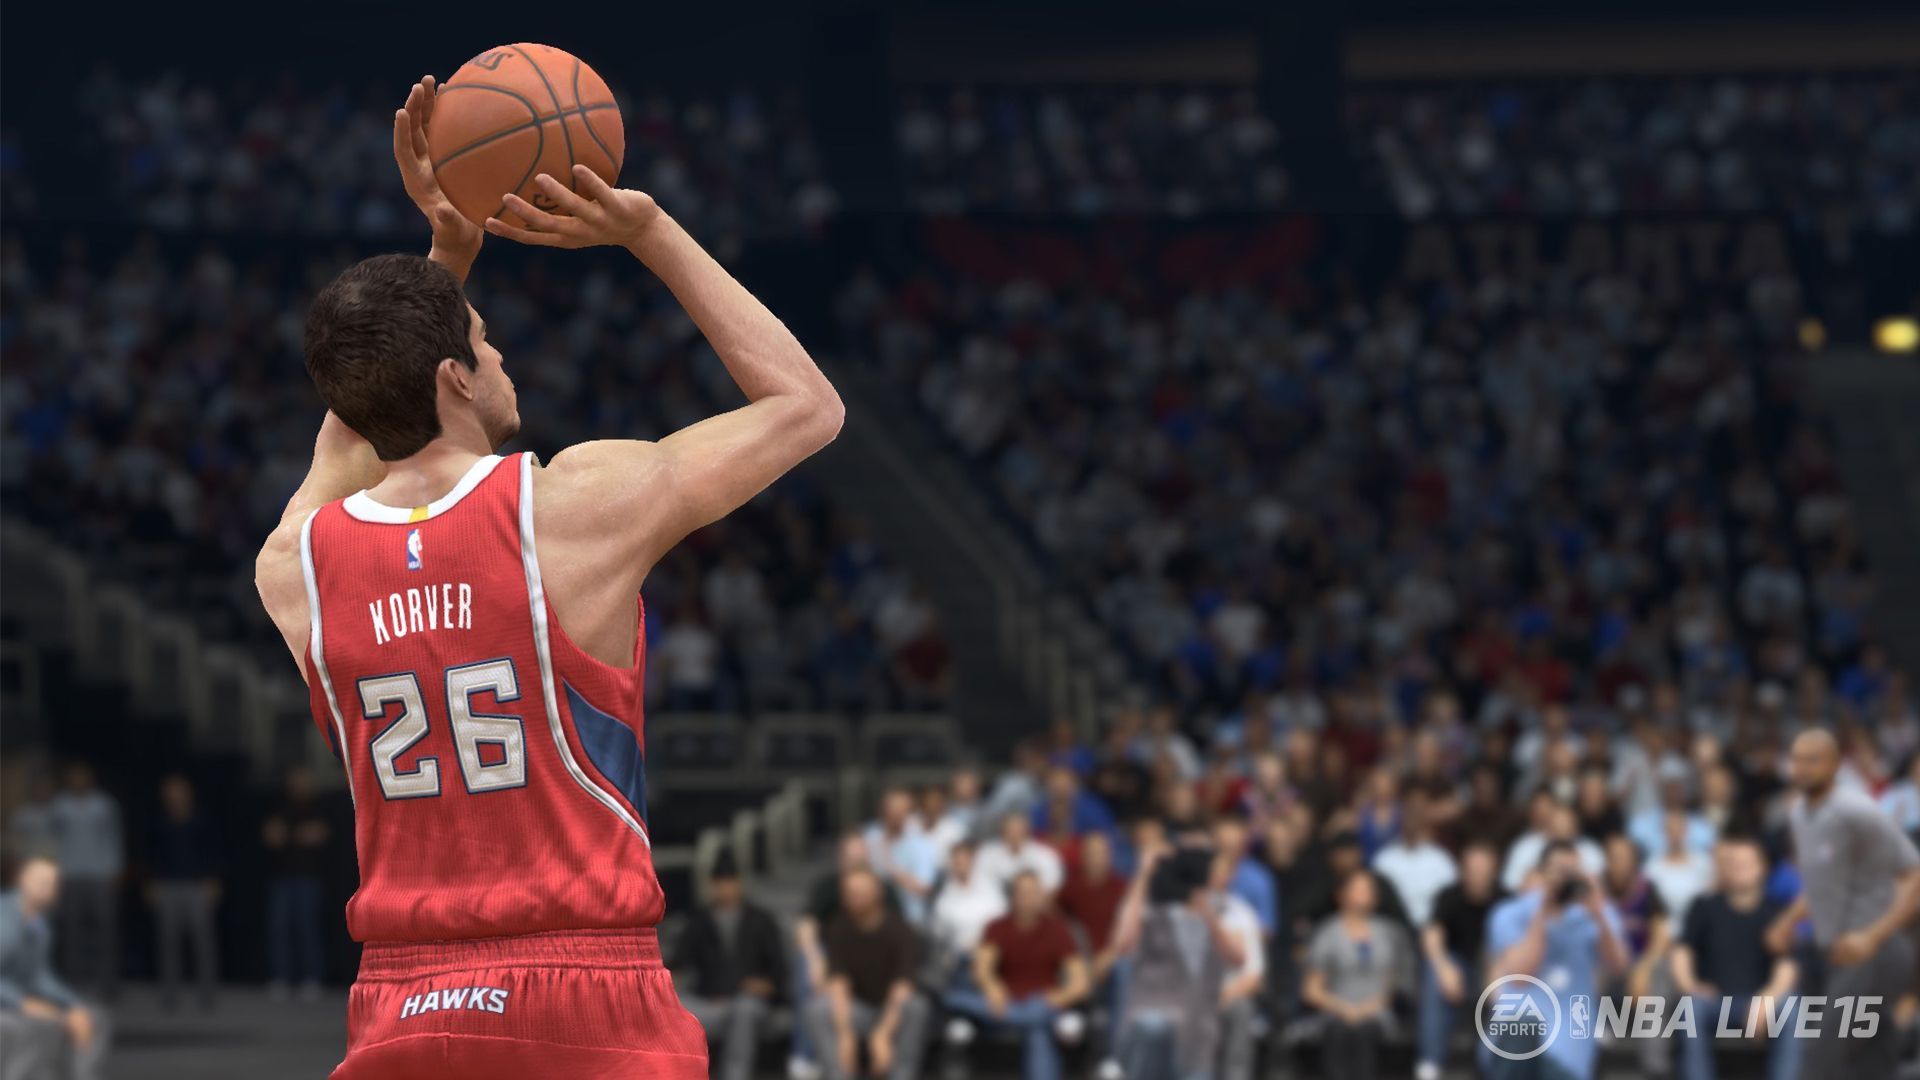 NBA Live 15 Review: Can't Buy a Bucket | Shacknews